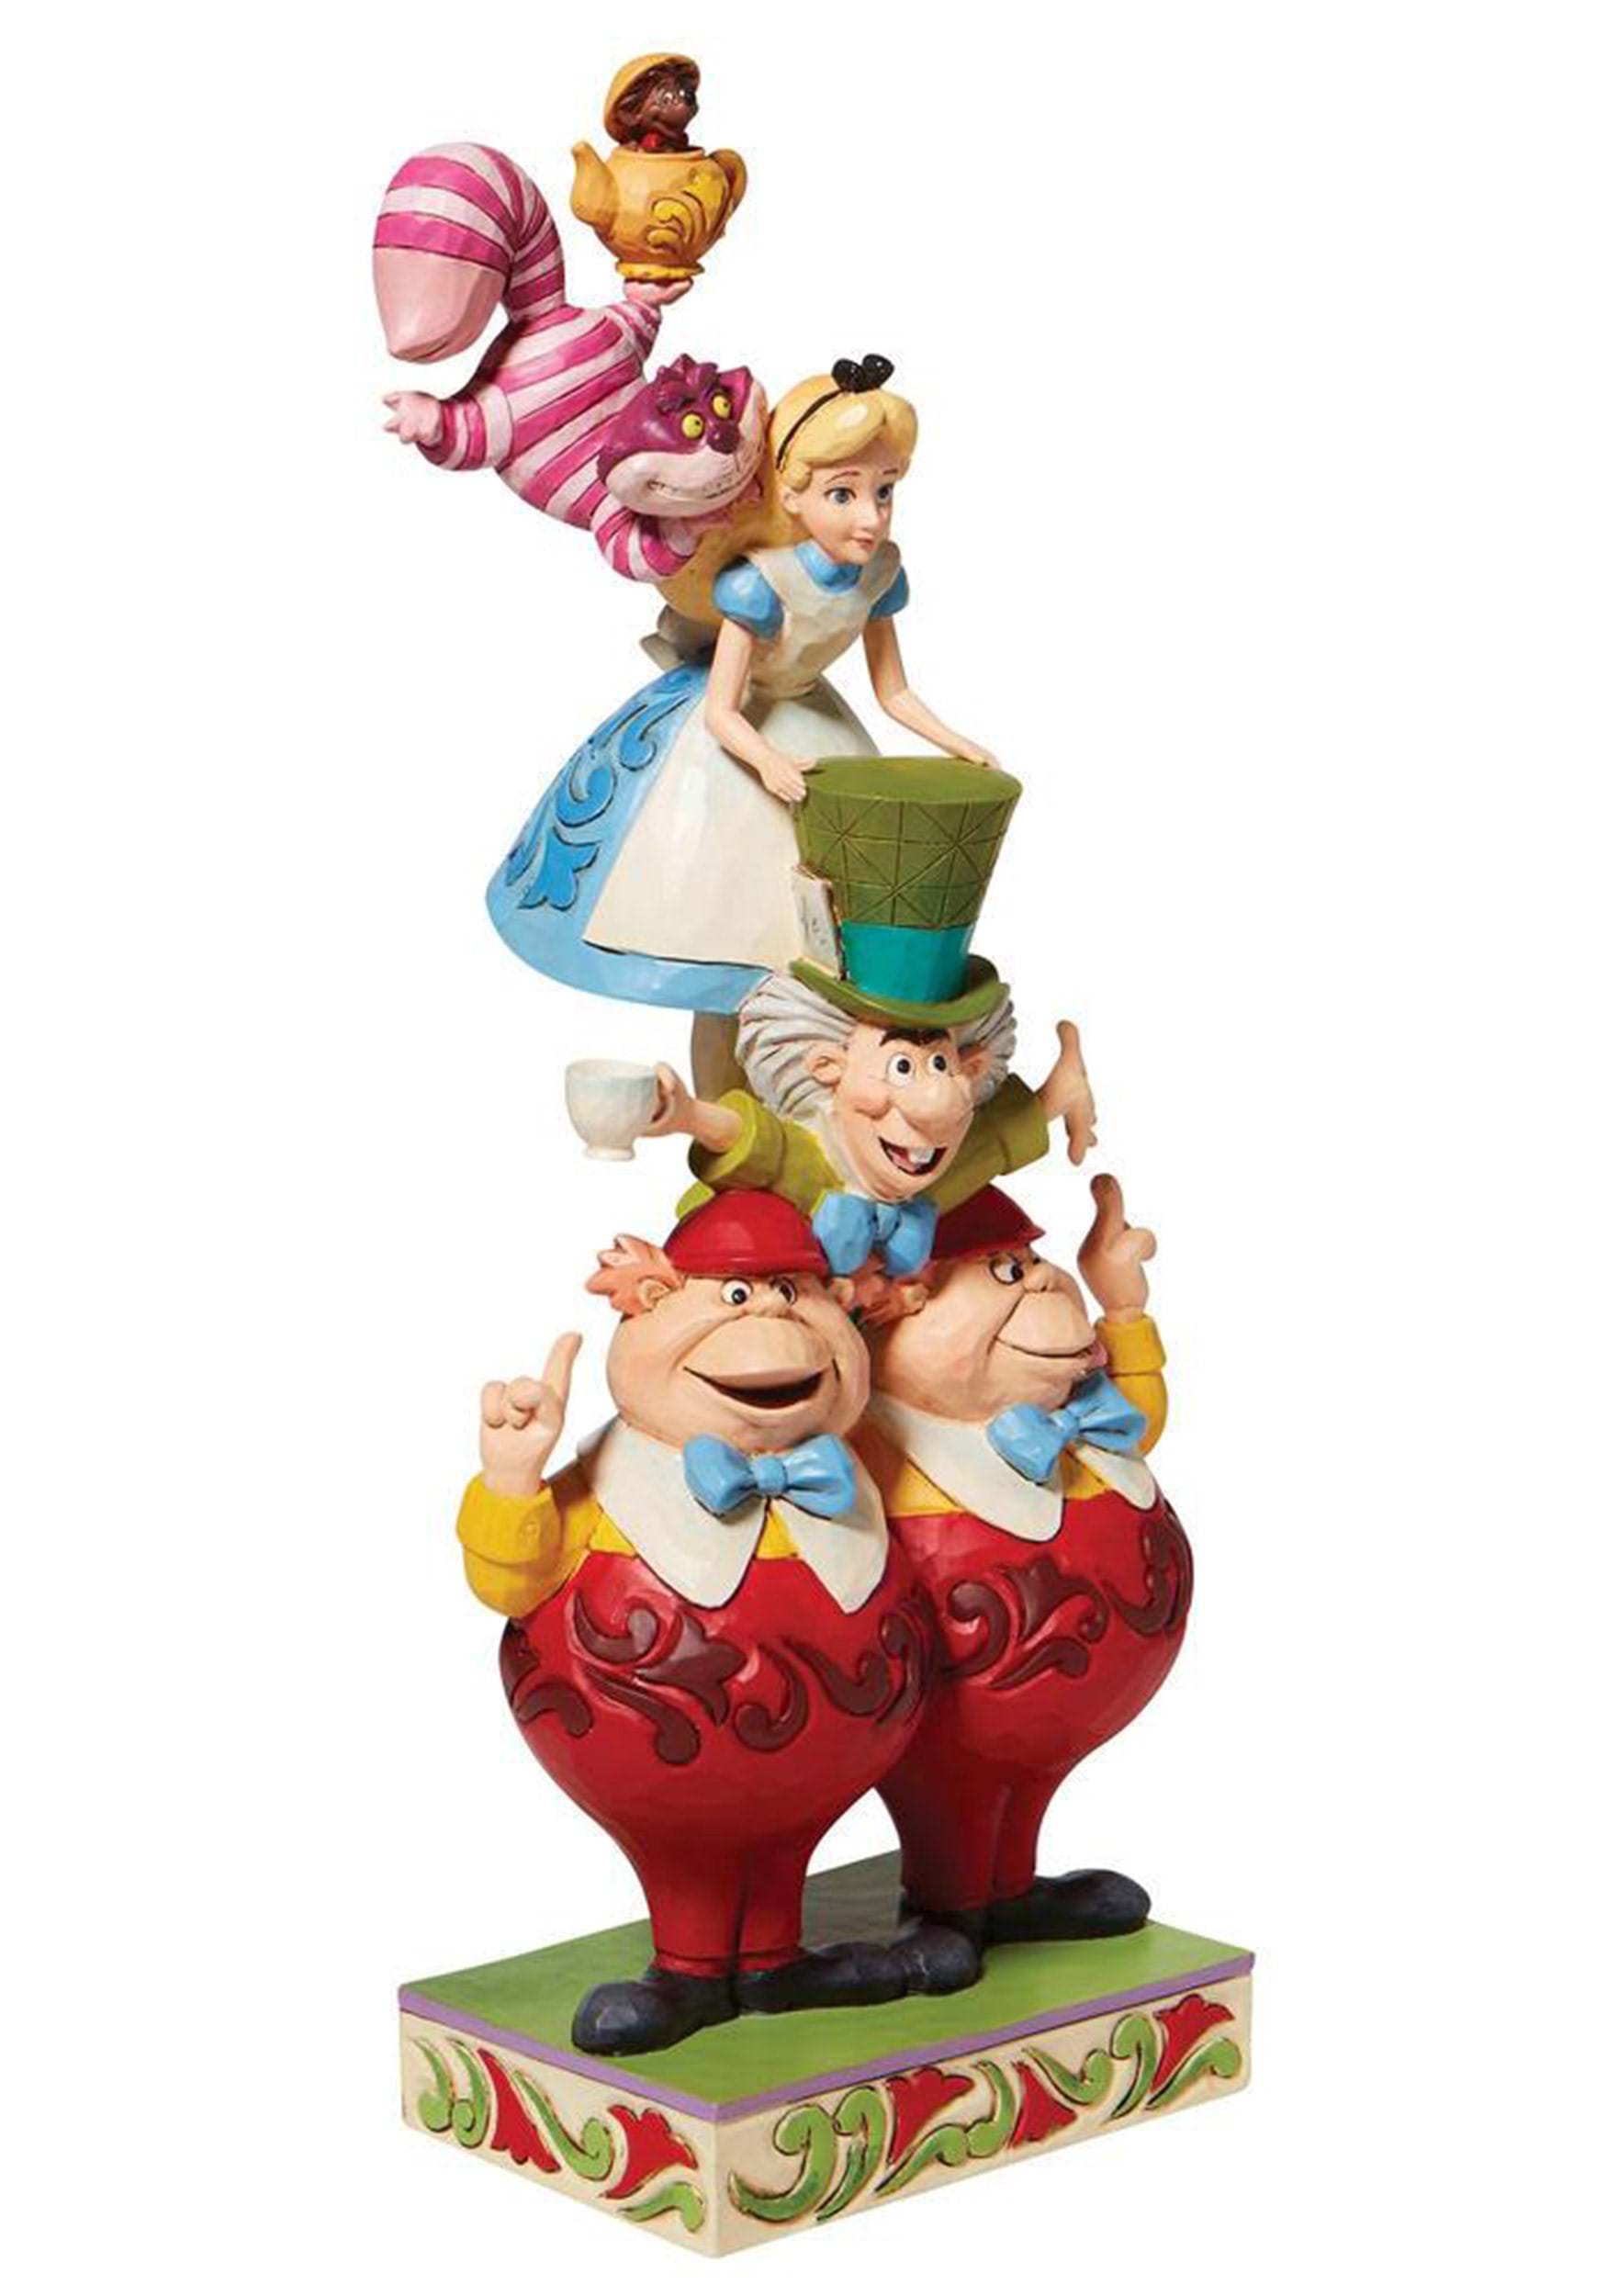 Holiday Ornaments Alice in Wonderland Ornament Set with Alice, White Rabbit, Cheshire Cat, Queen of Hearts, Mad Hatter and Friends